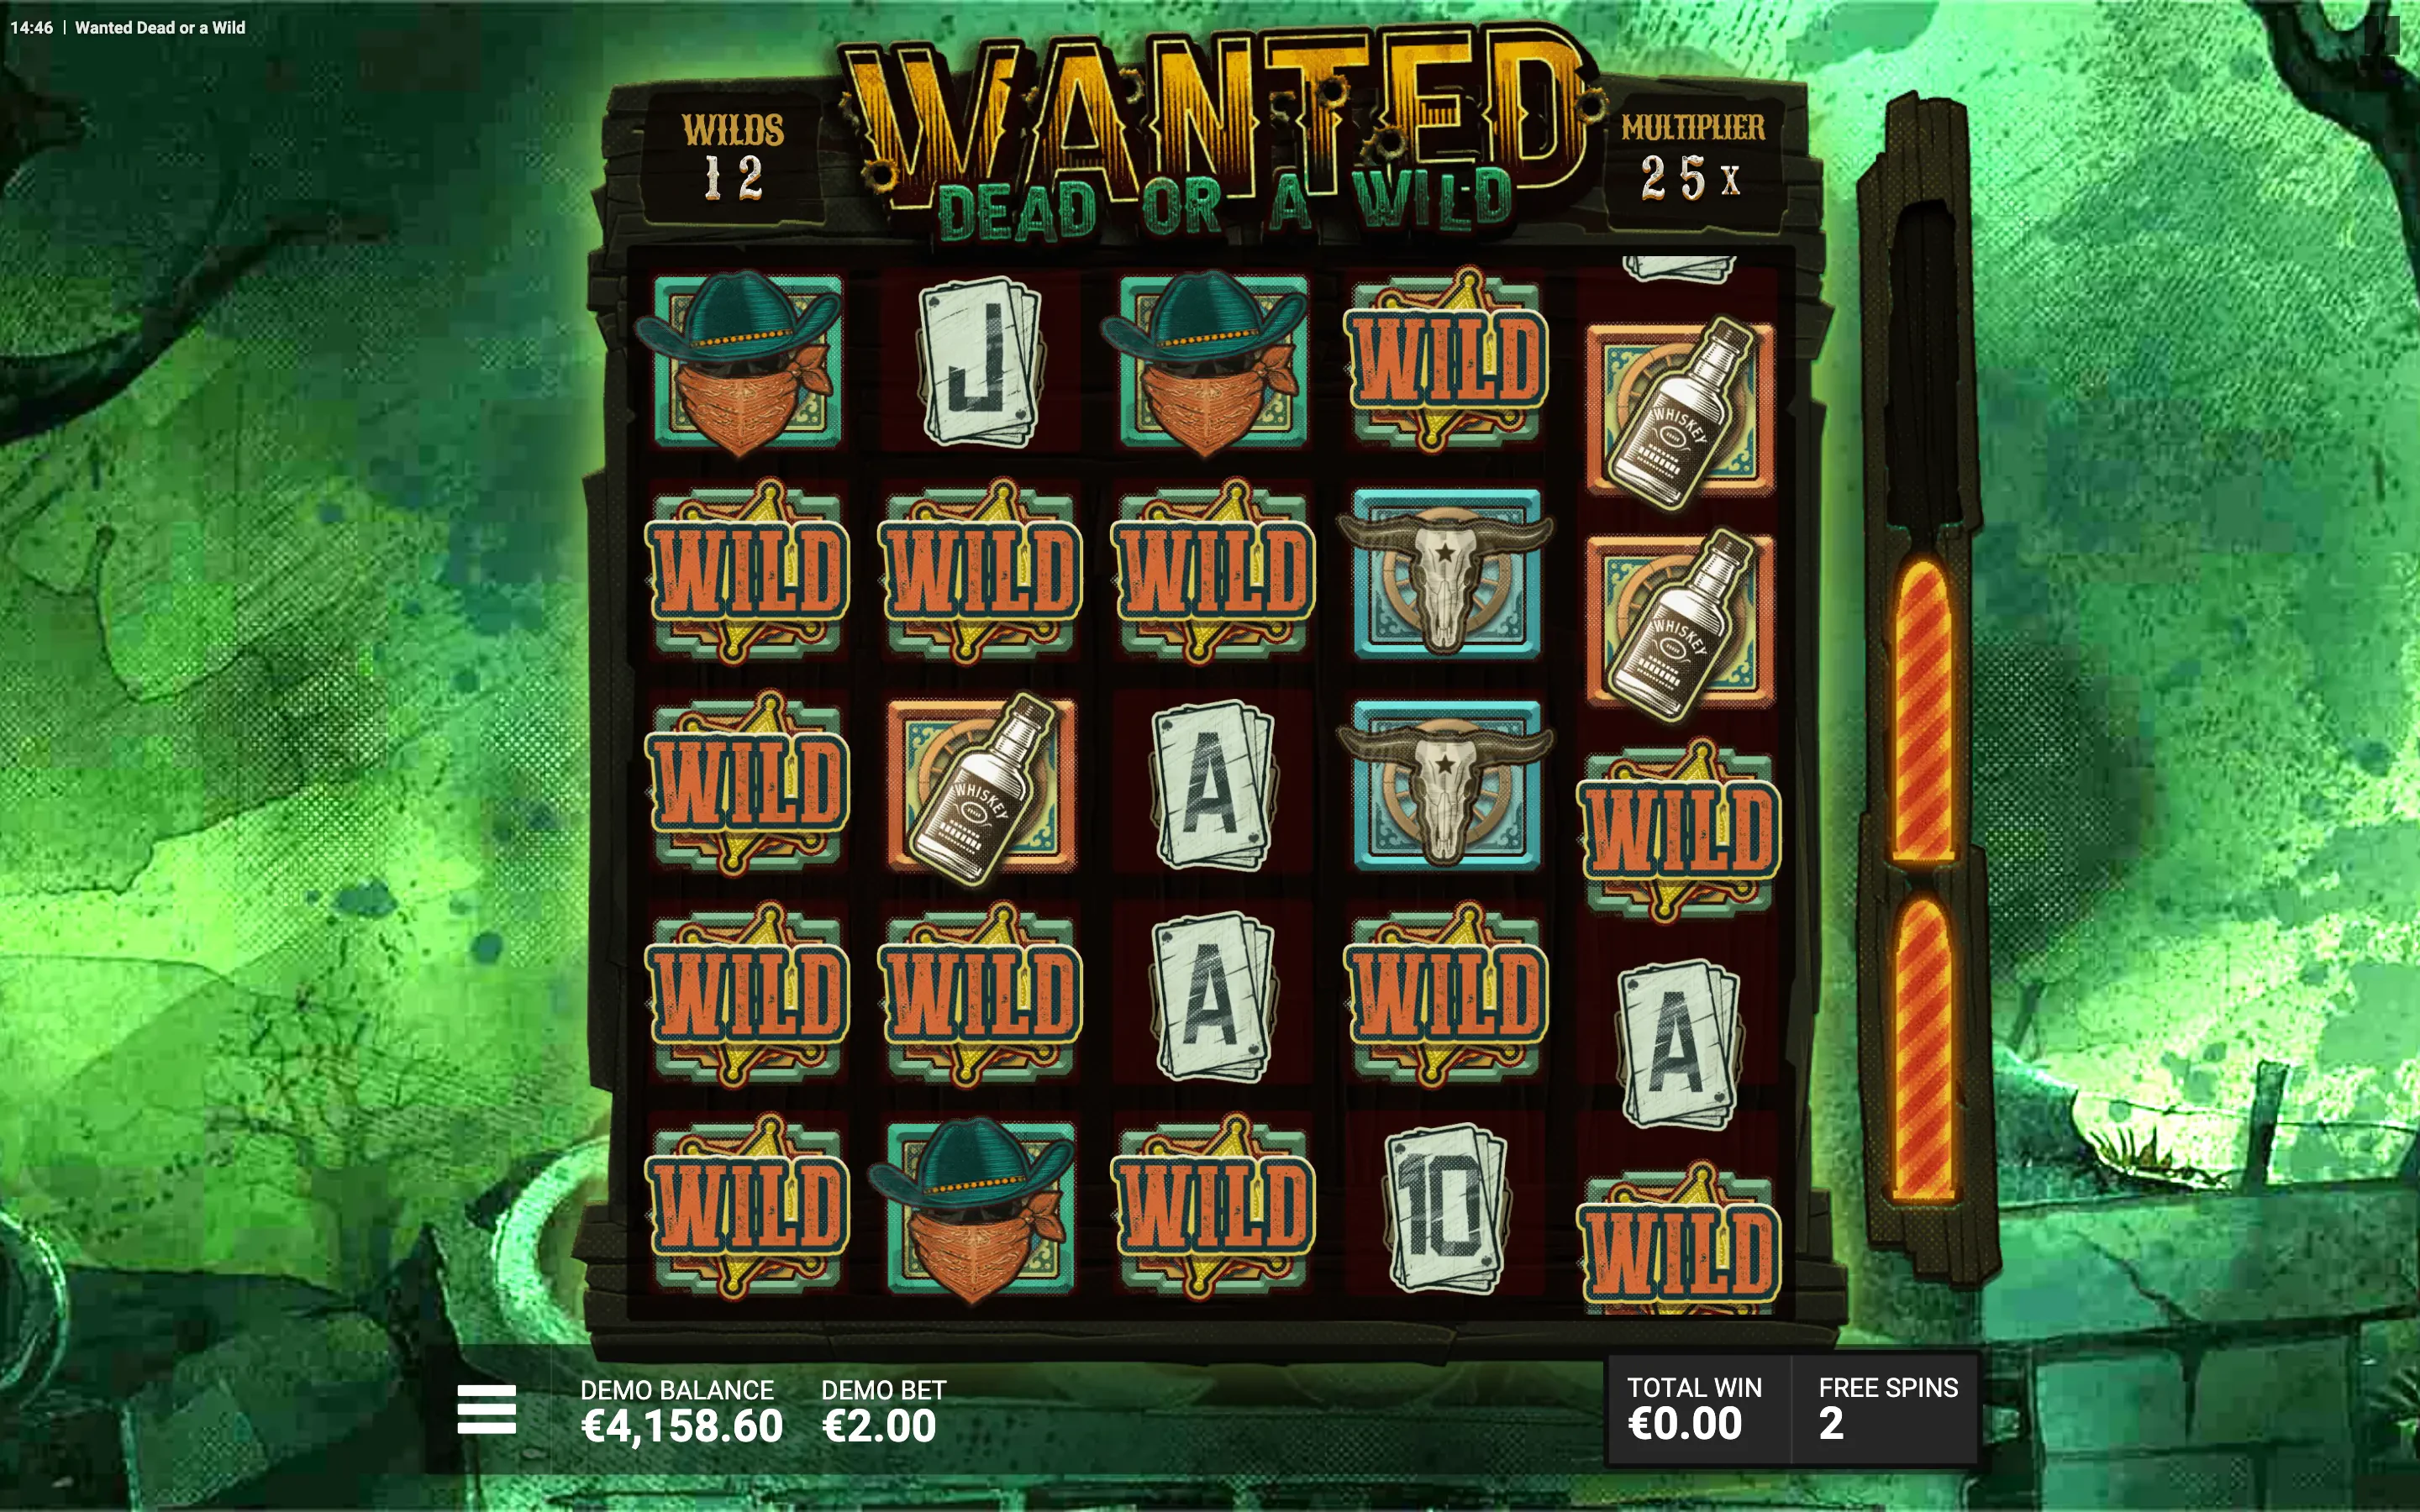 Wanted Dead or a Wild Dead Man's Hand